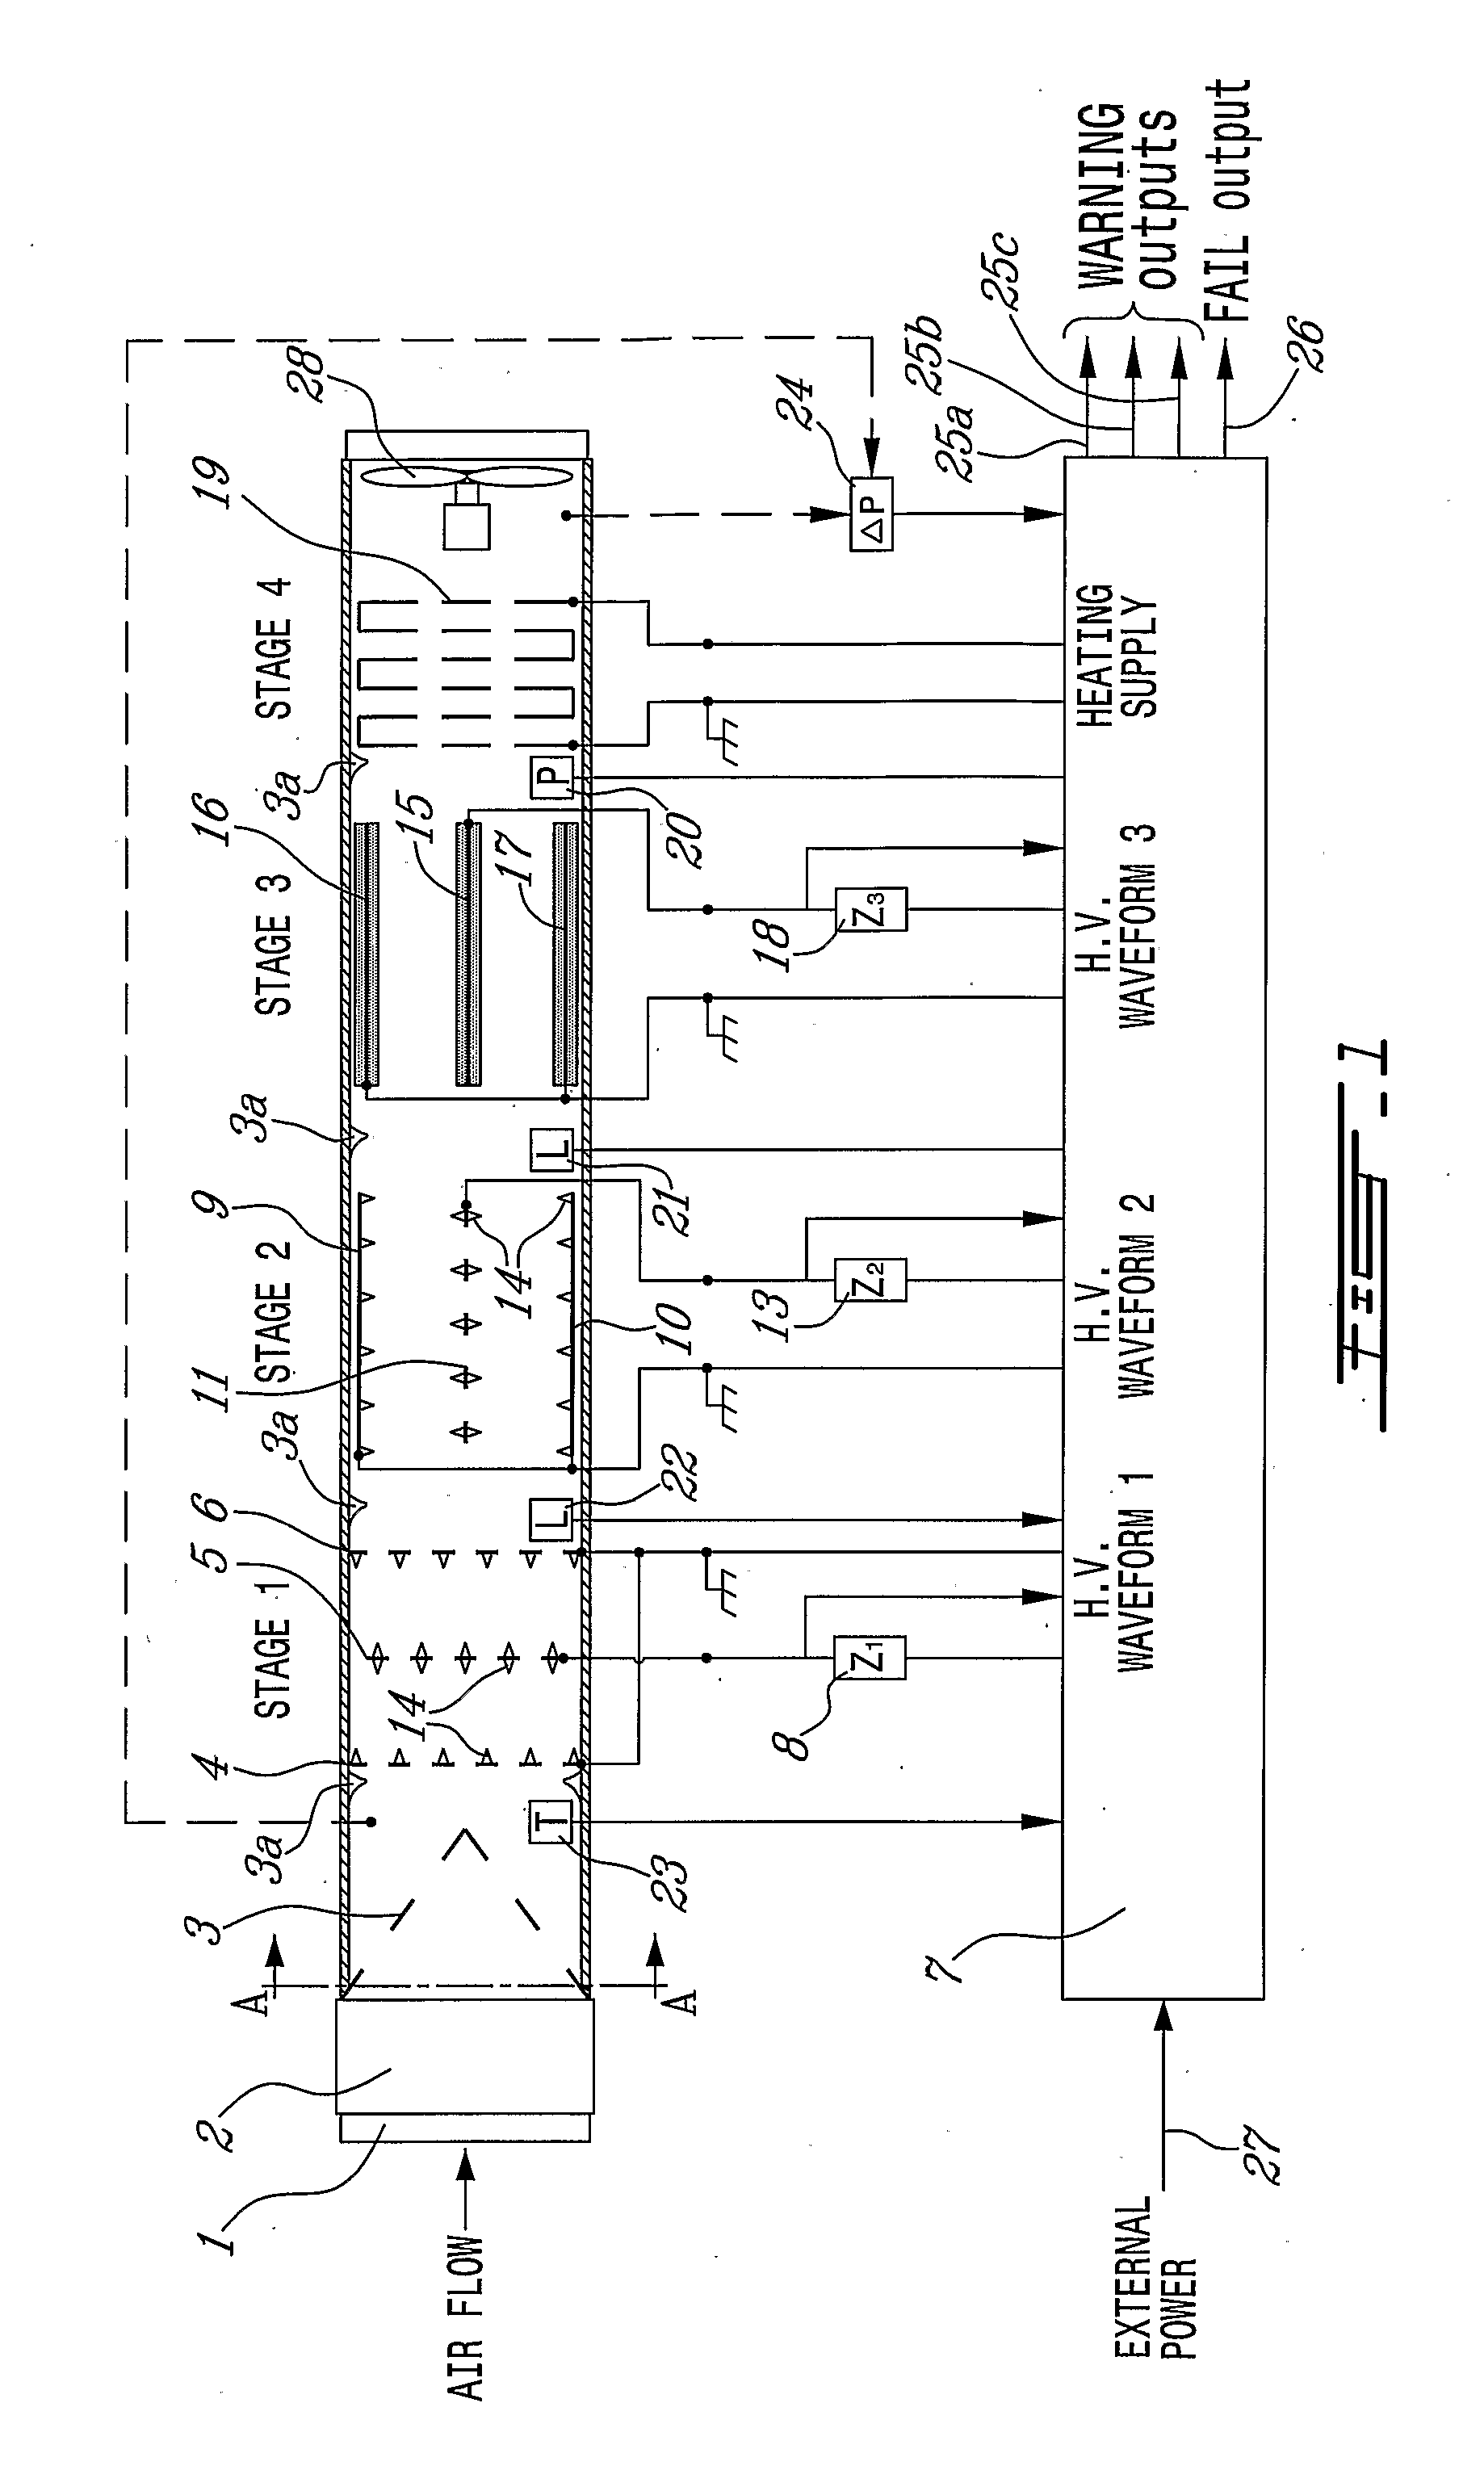 System for Treating Contaminated Gas